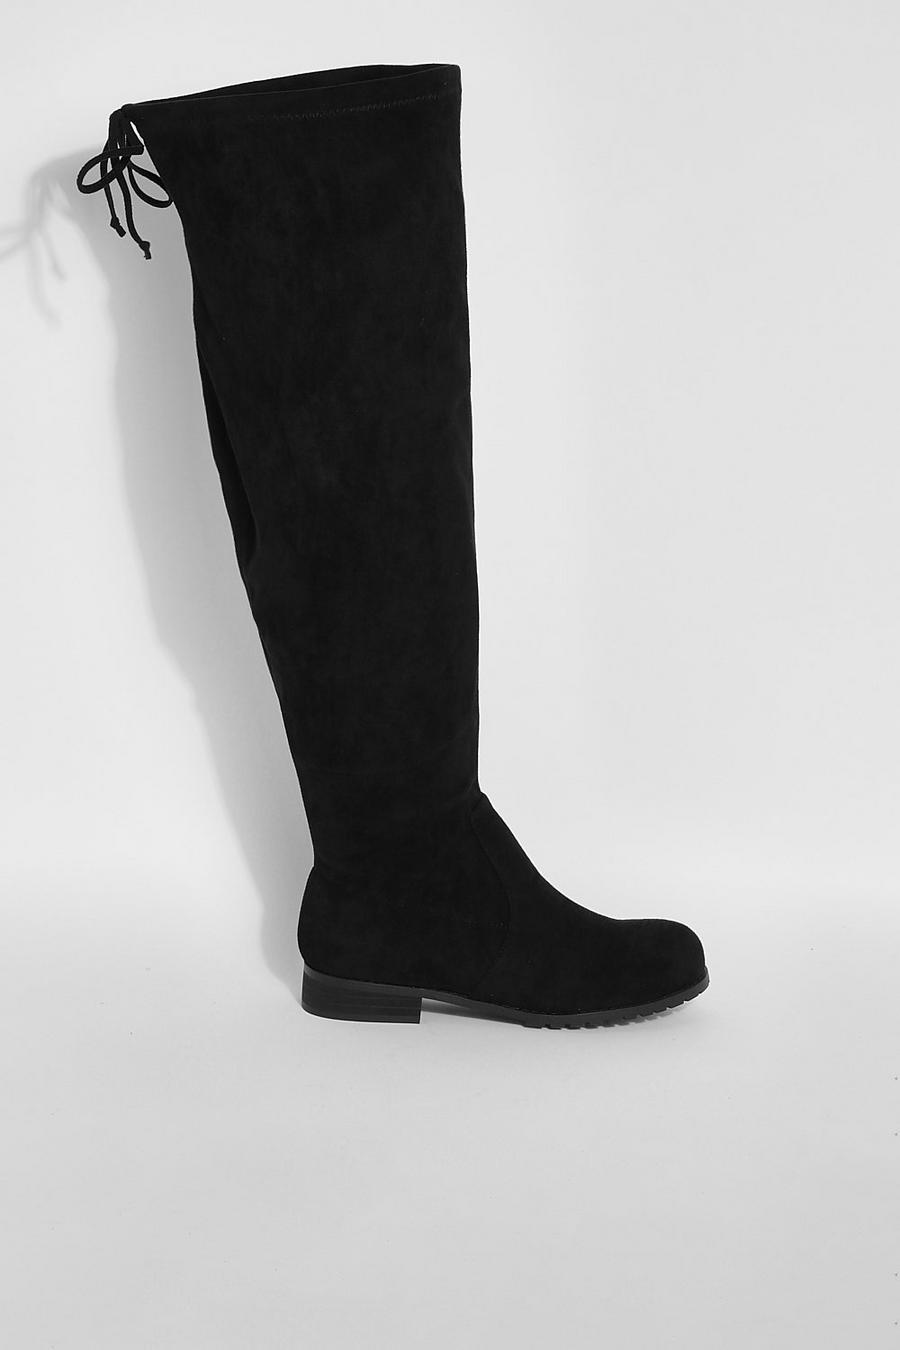 Black Wide Calf Tie Detail Over The Knee Boots